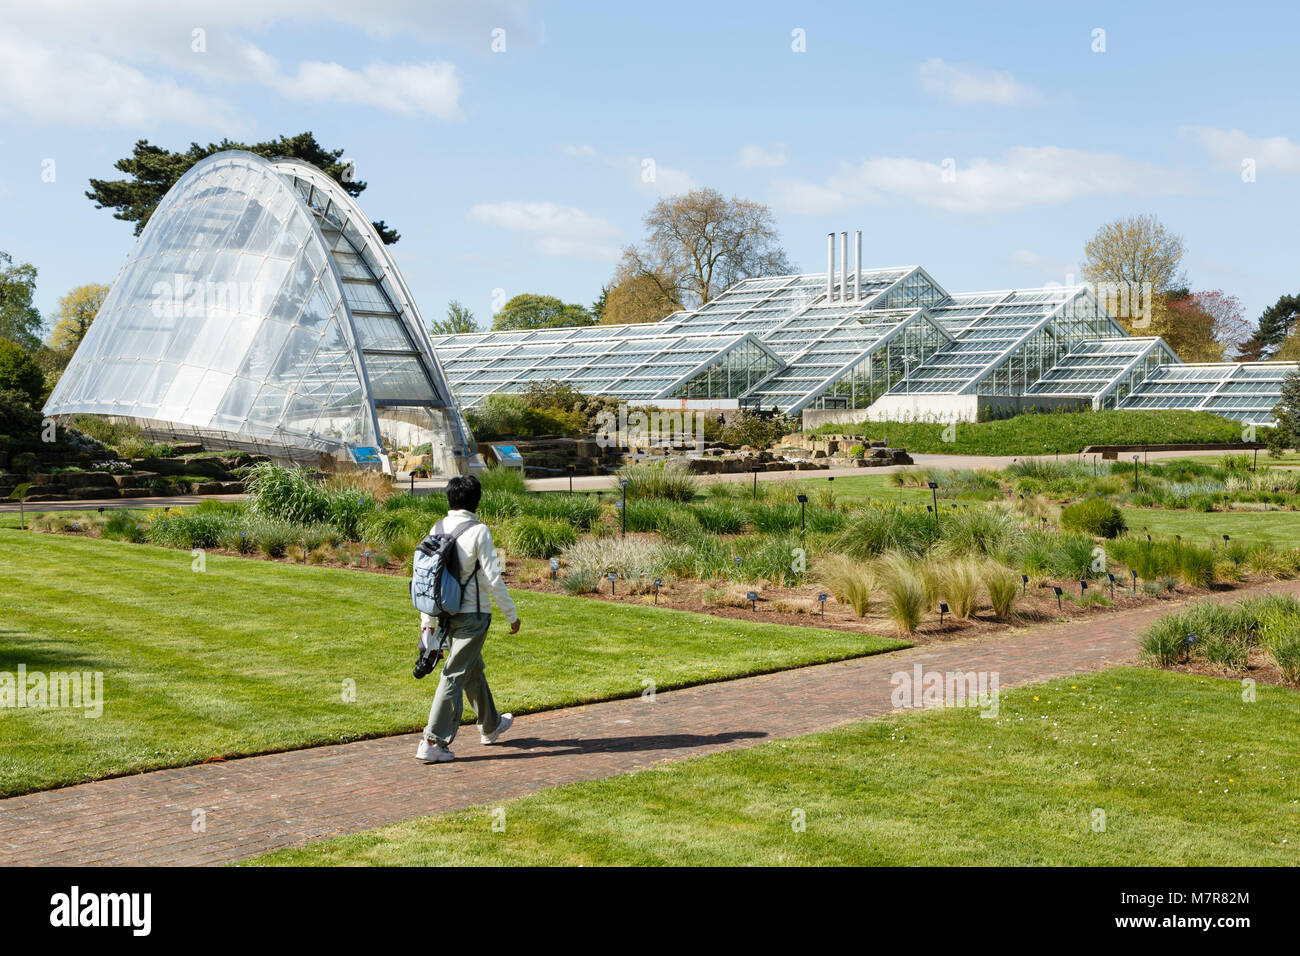 London, UK - April 18, 2014. Davies Alpine House and Princess of Wales Conservatory at Kew Botanic Gardens. The gardens were founded in 1840. Stock Photo